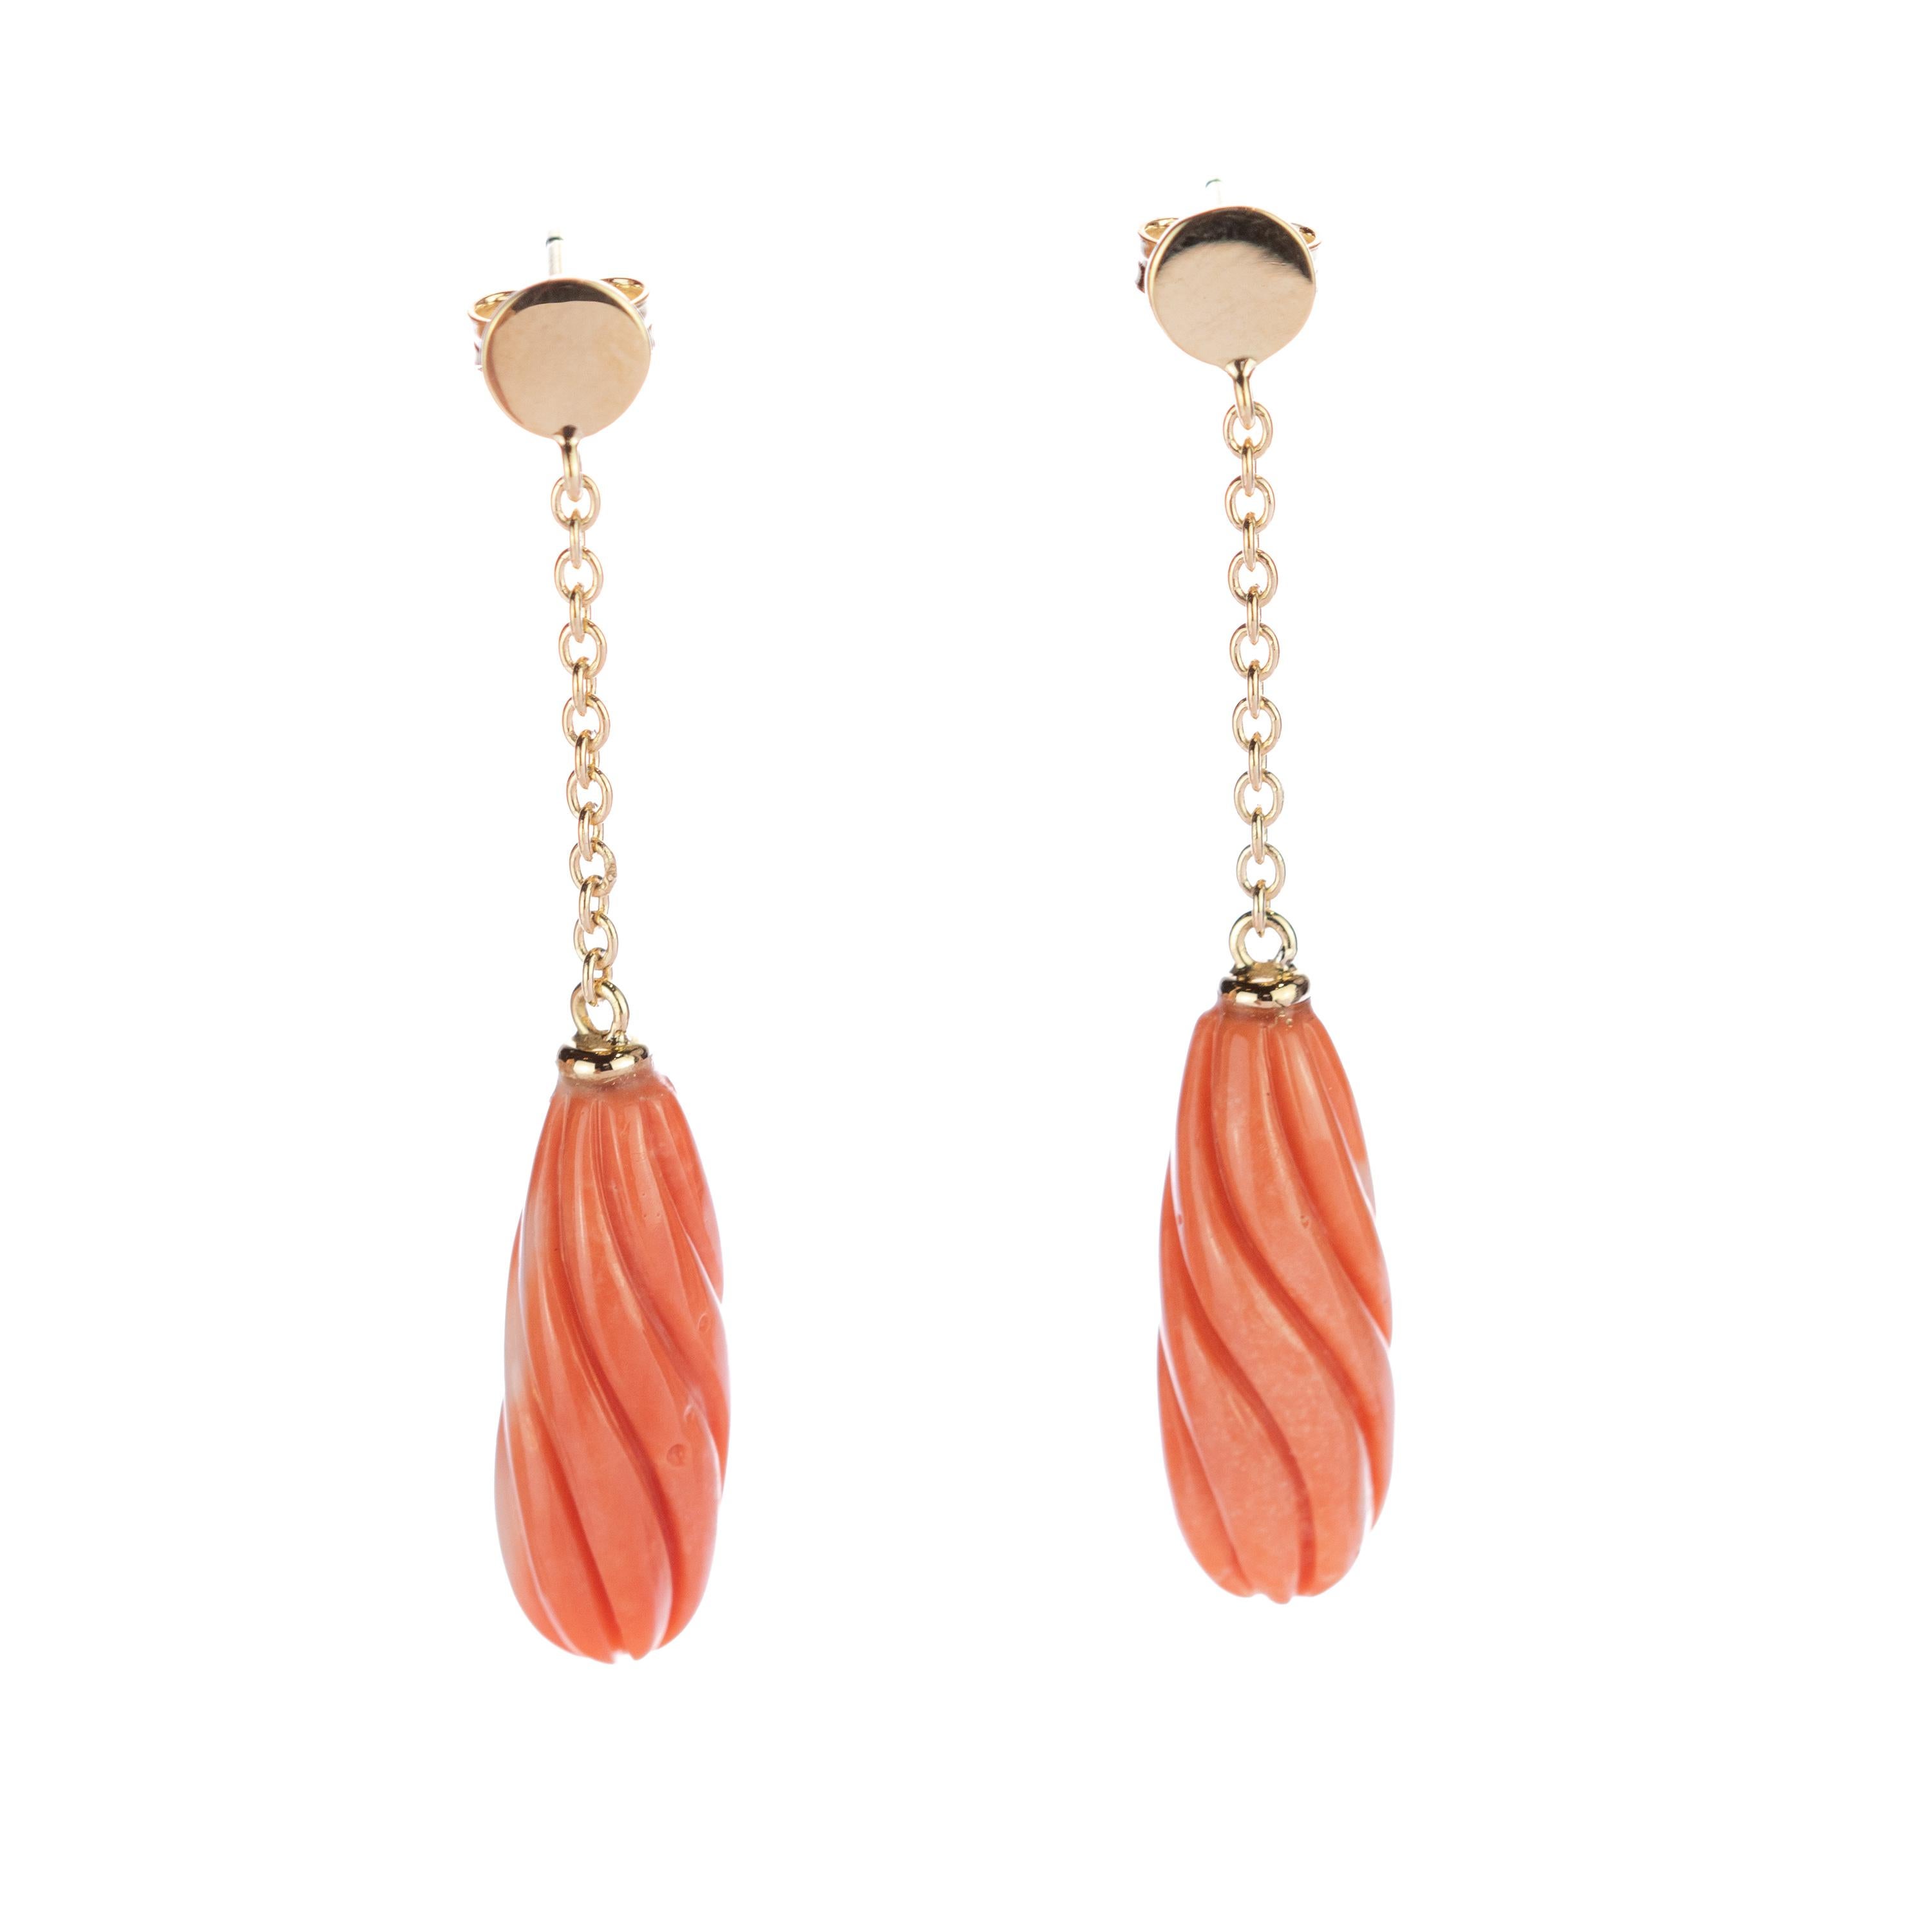 Exotic 23 carat coral earrings. The 18 karat yellow gold enhances the piece with a round circle that is connected to a delicate chain holding a beautifully carved and light salmon natural coral long shaped gem. Italians own the art of coral carving.